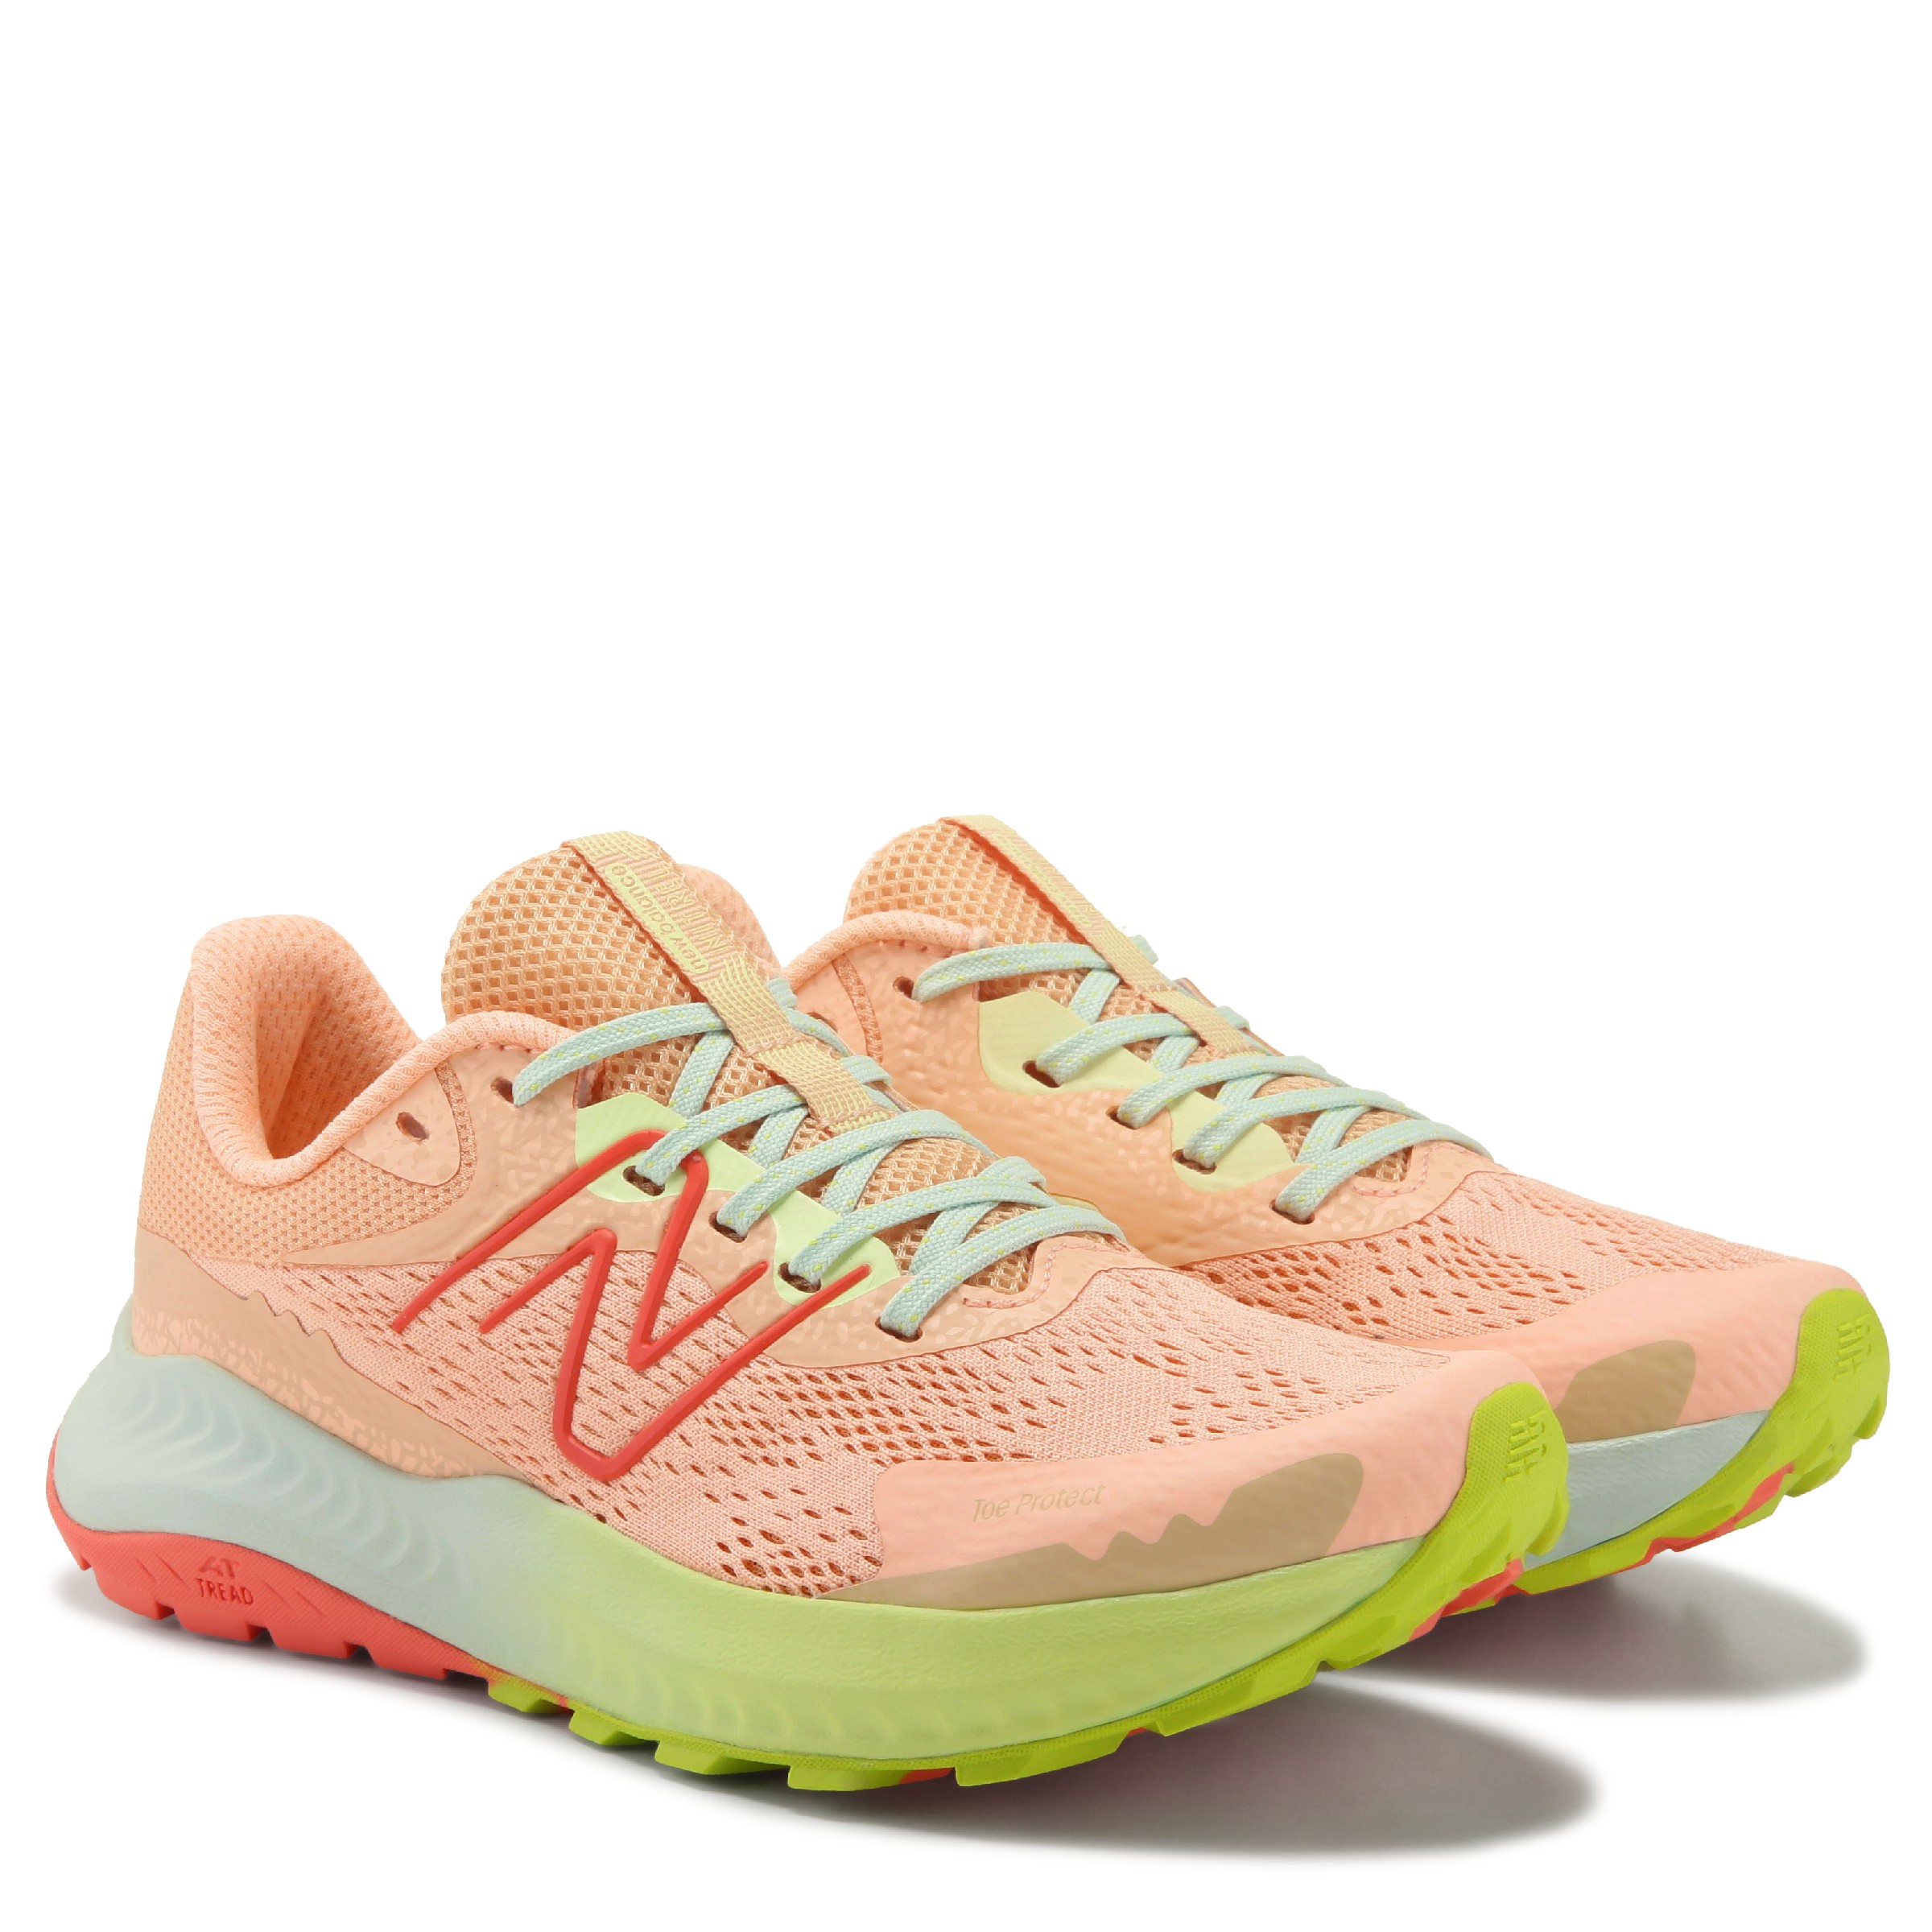 New Balance 23FW 327 Lifestyle Women's Sneakers Casual Shoes Natural B  WS327OS | eBay